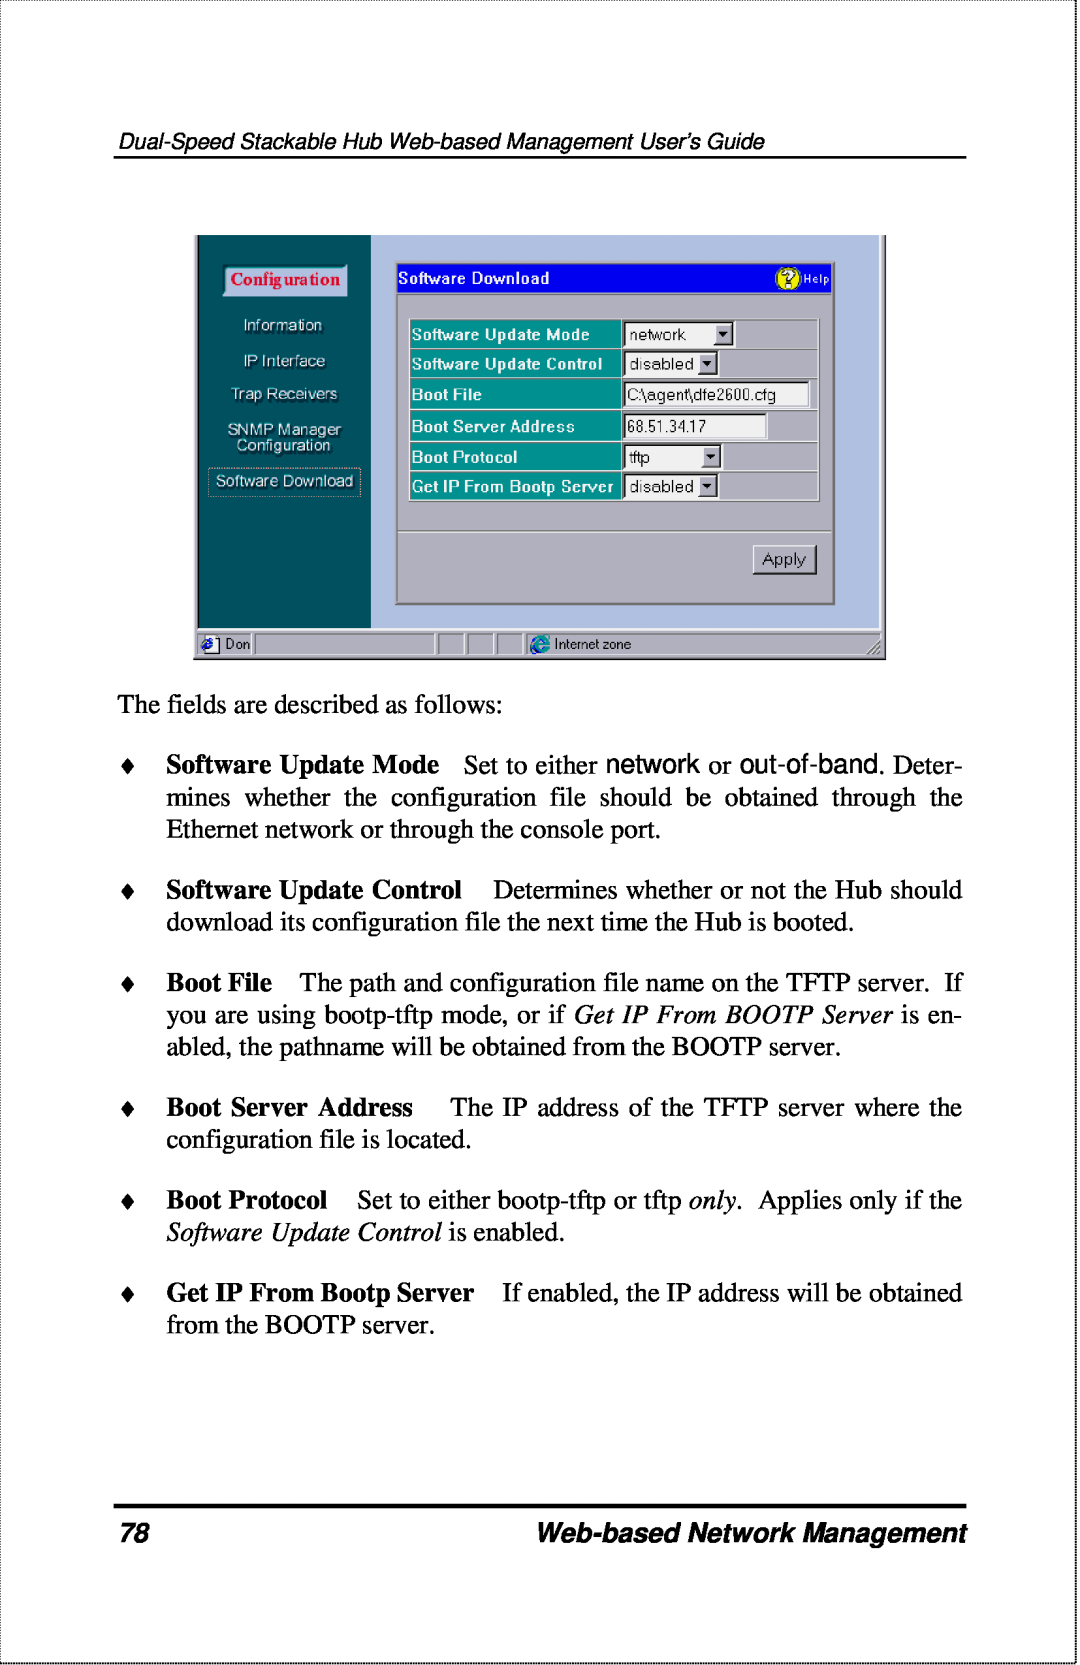 D-Link DFE-2600 manual The fields are described as follows, Web-based Network Management 